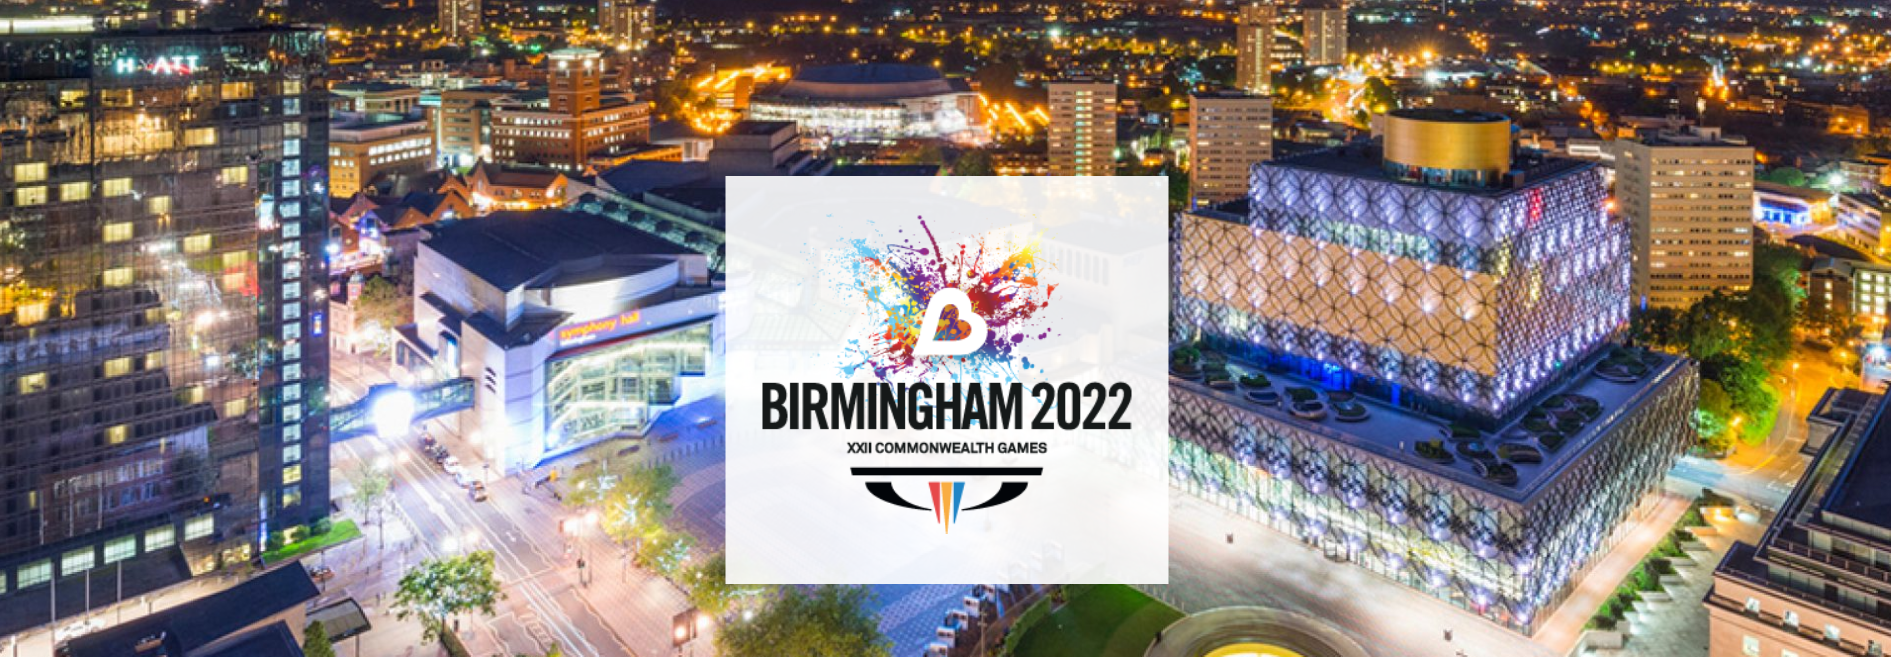 It is hoped the 2022 Commonwealth Games will leave a lasting legacy for Birmingham ©Birmingham 2022